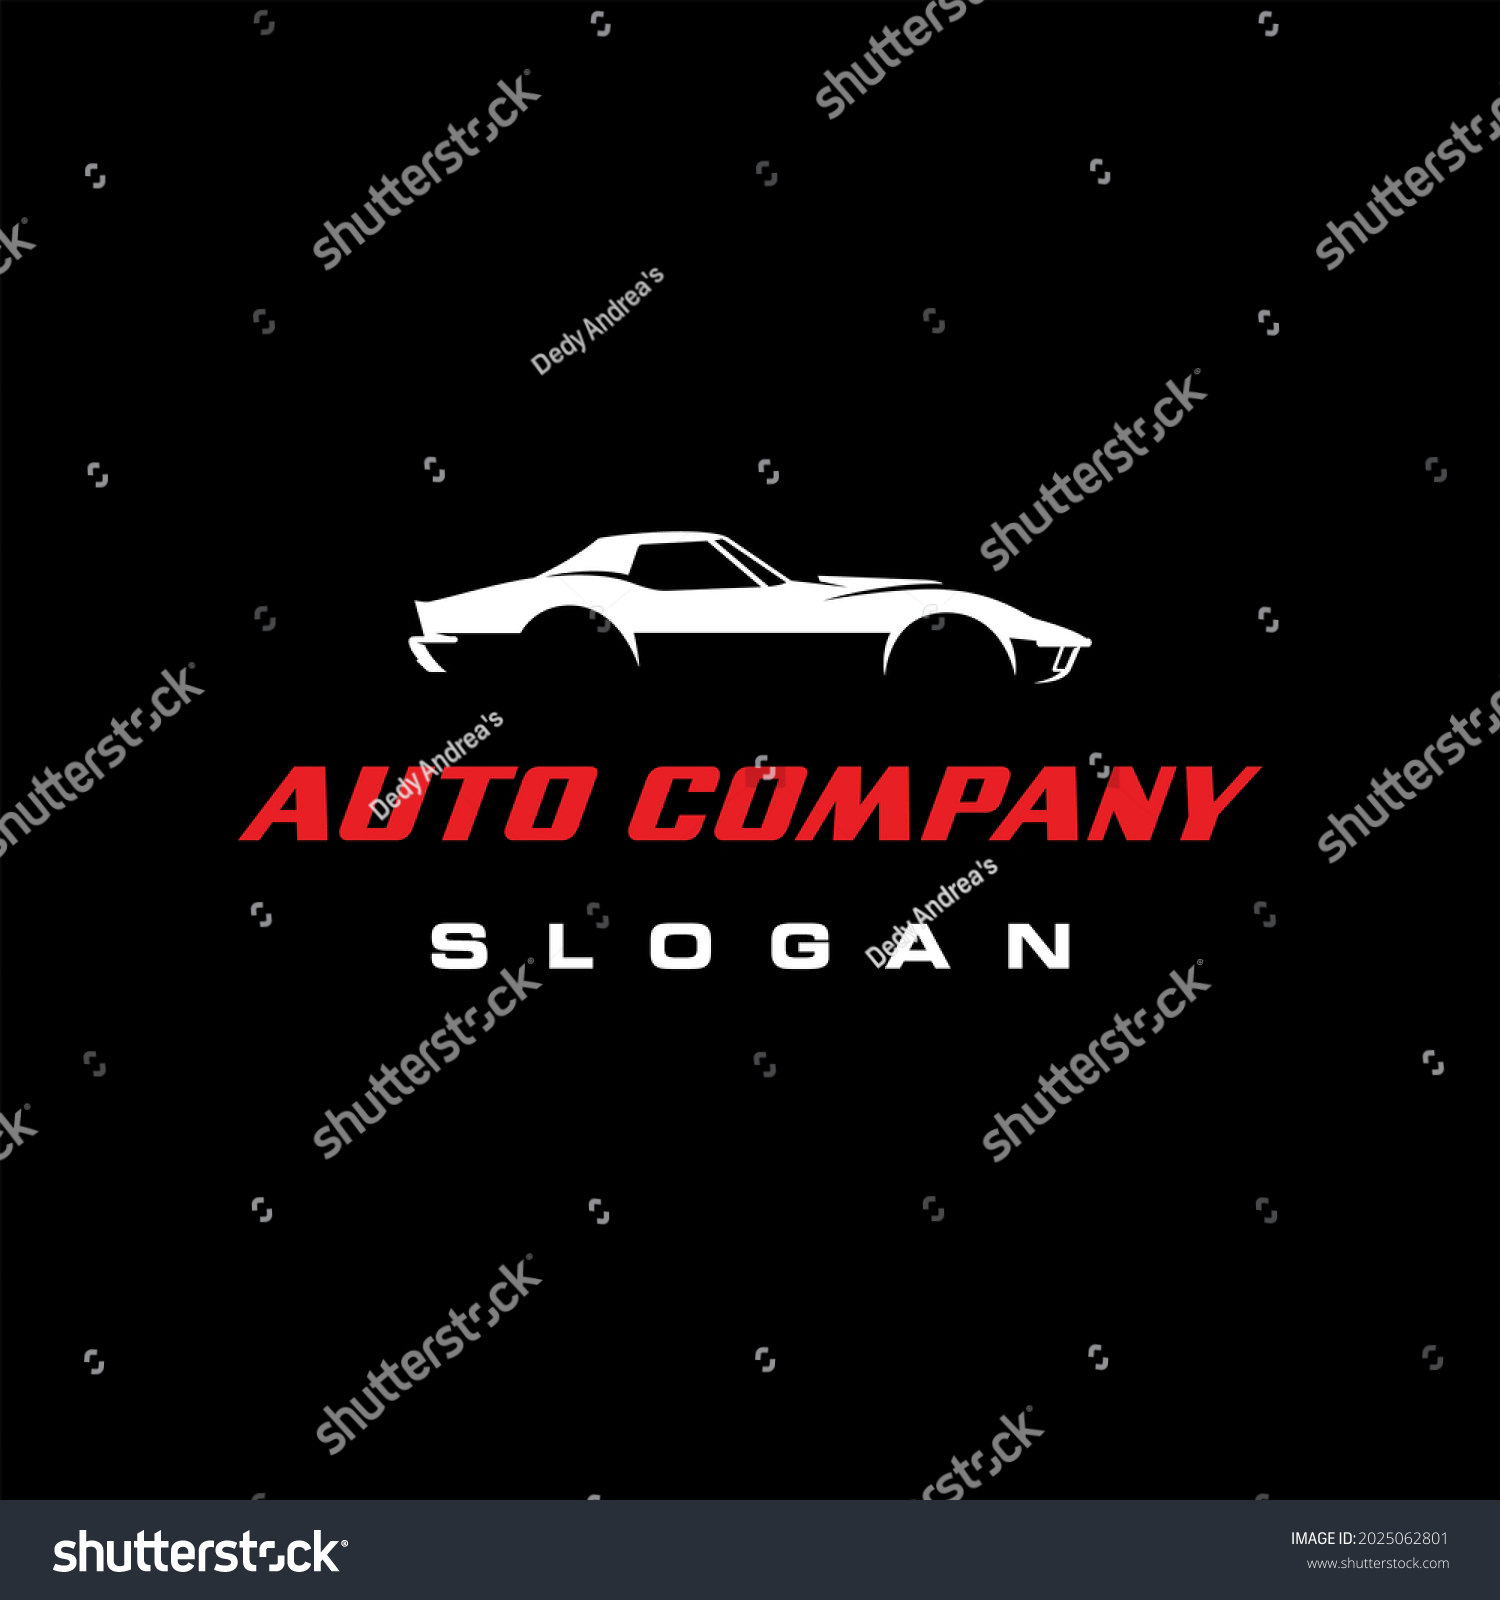 SVG of Classic car with elegant and simple design style svg